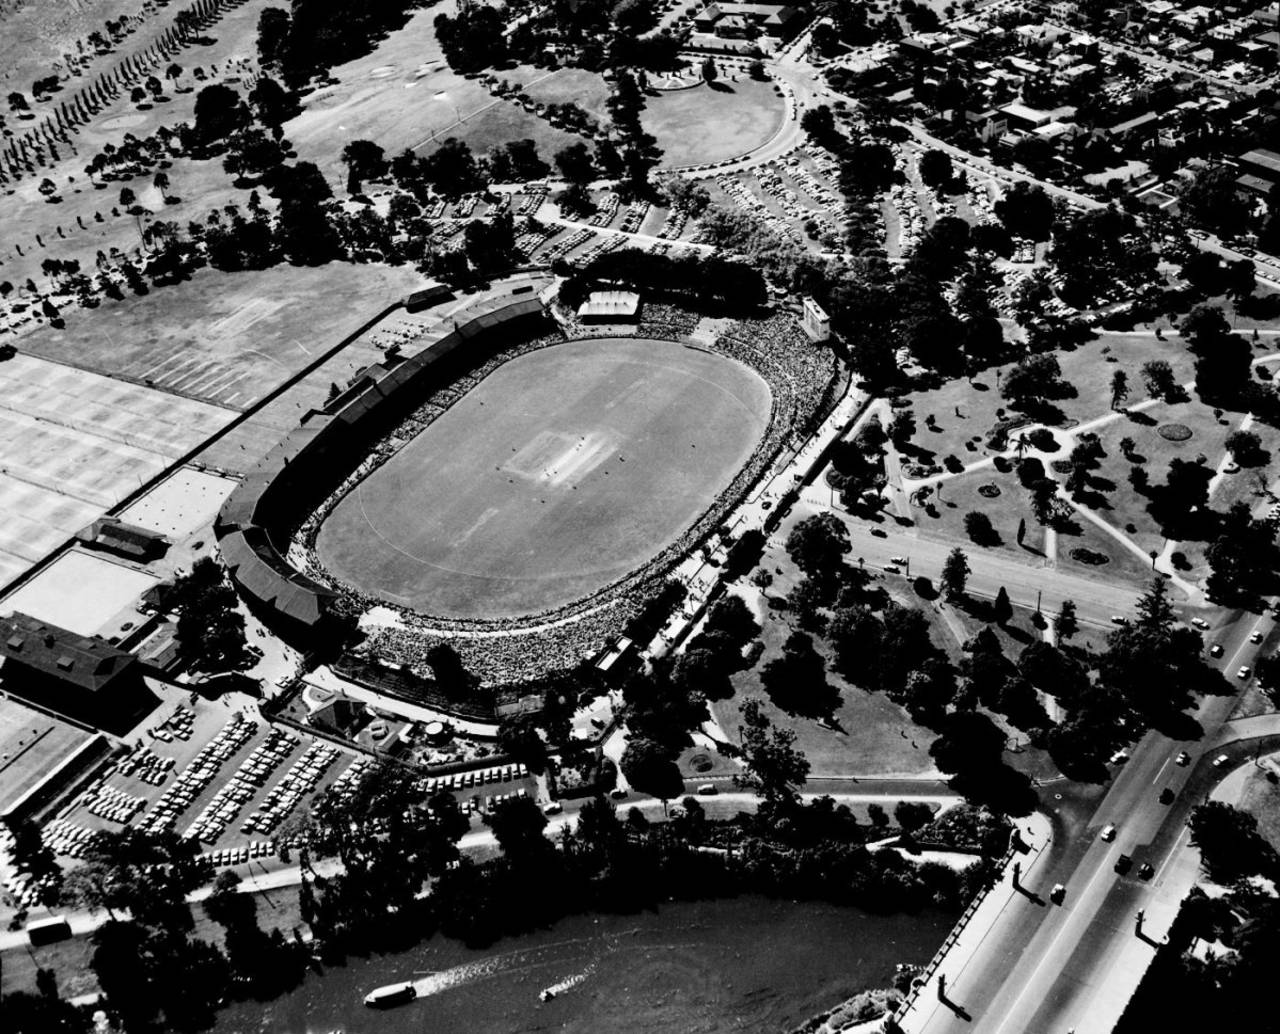 The Adelaide Oval, January 31, 1963